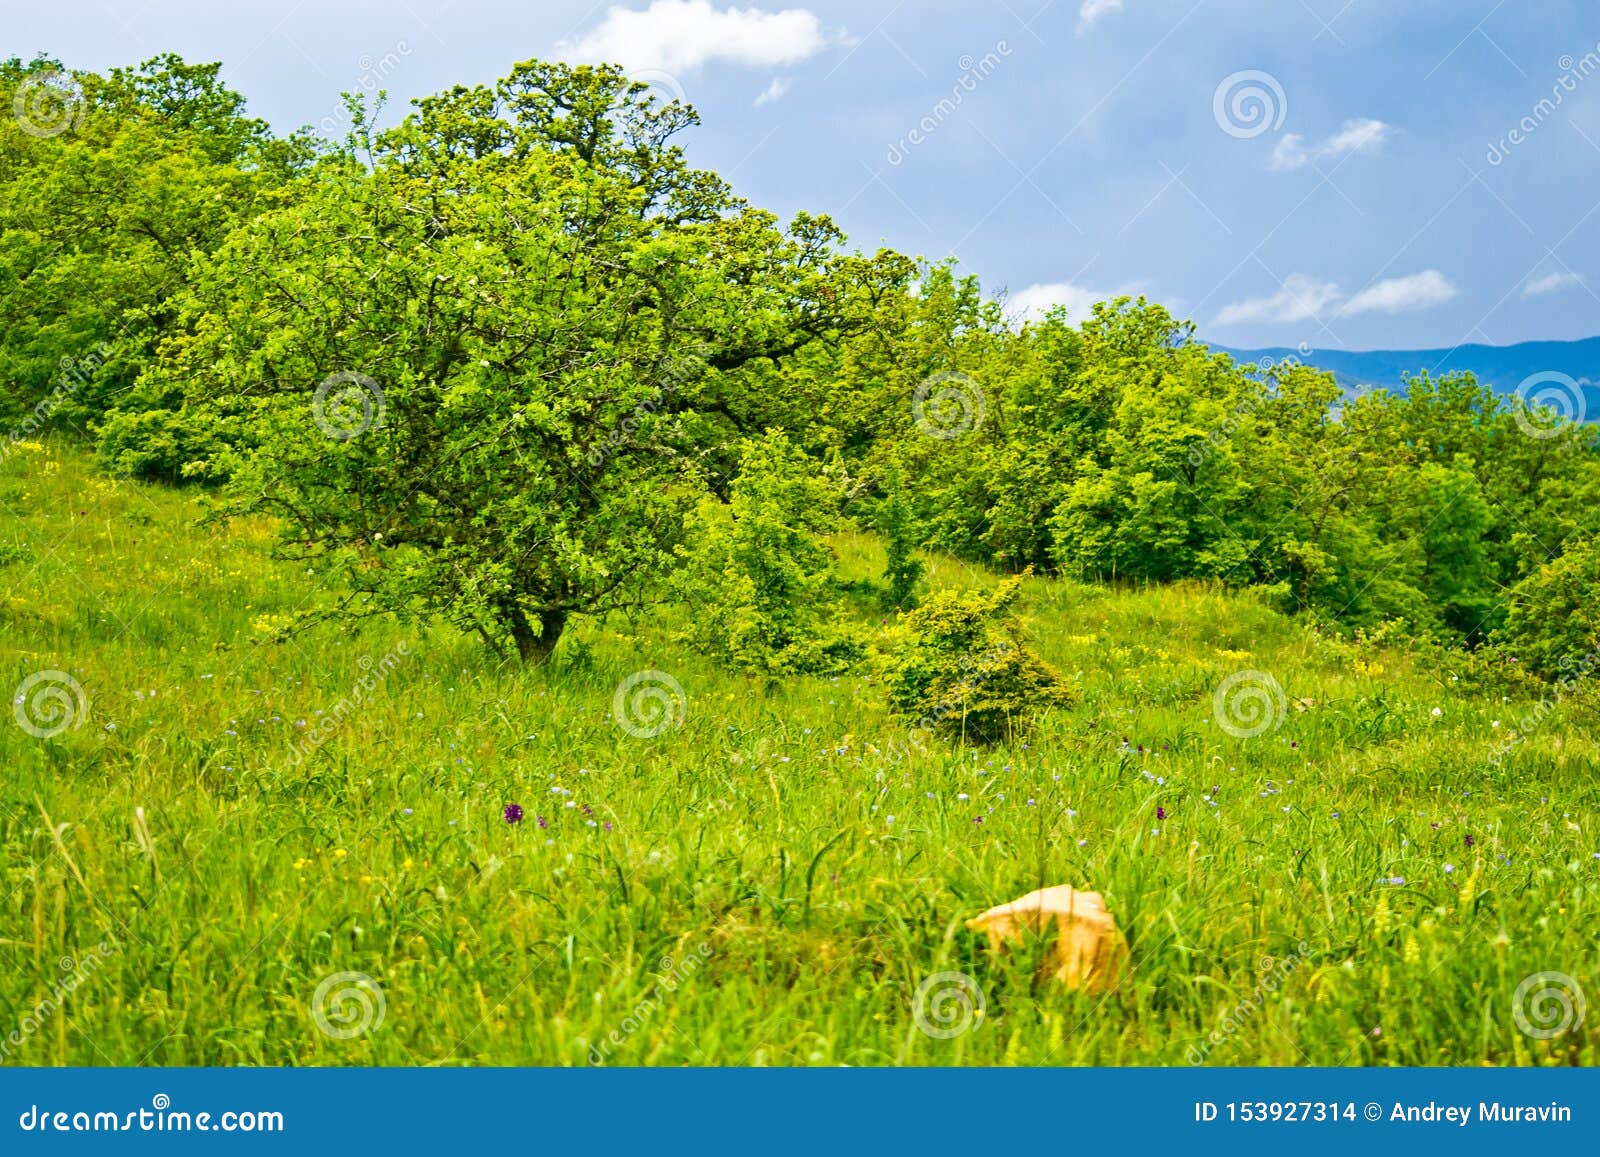 Nature in greenery 8 stock photo. of green 153927314